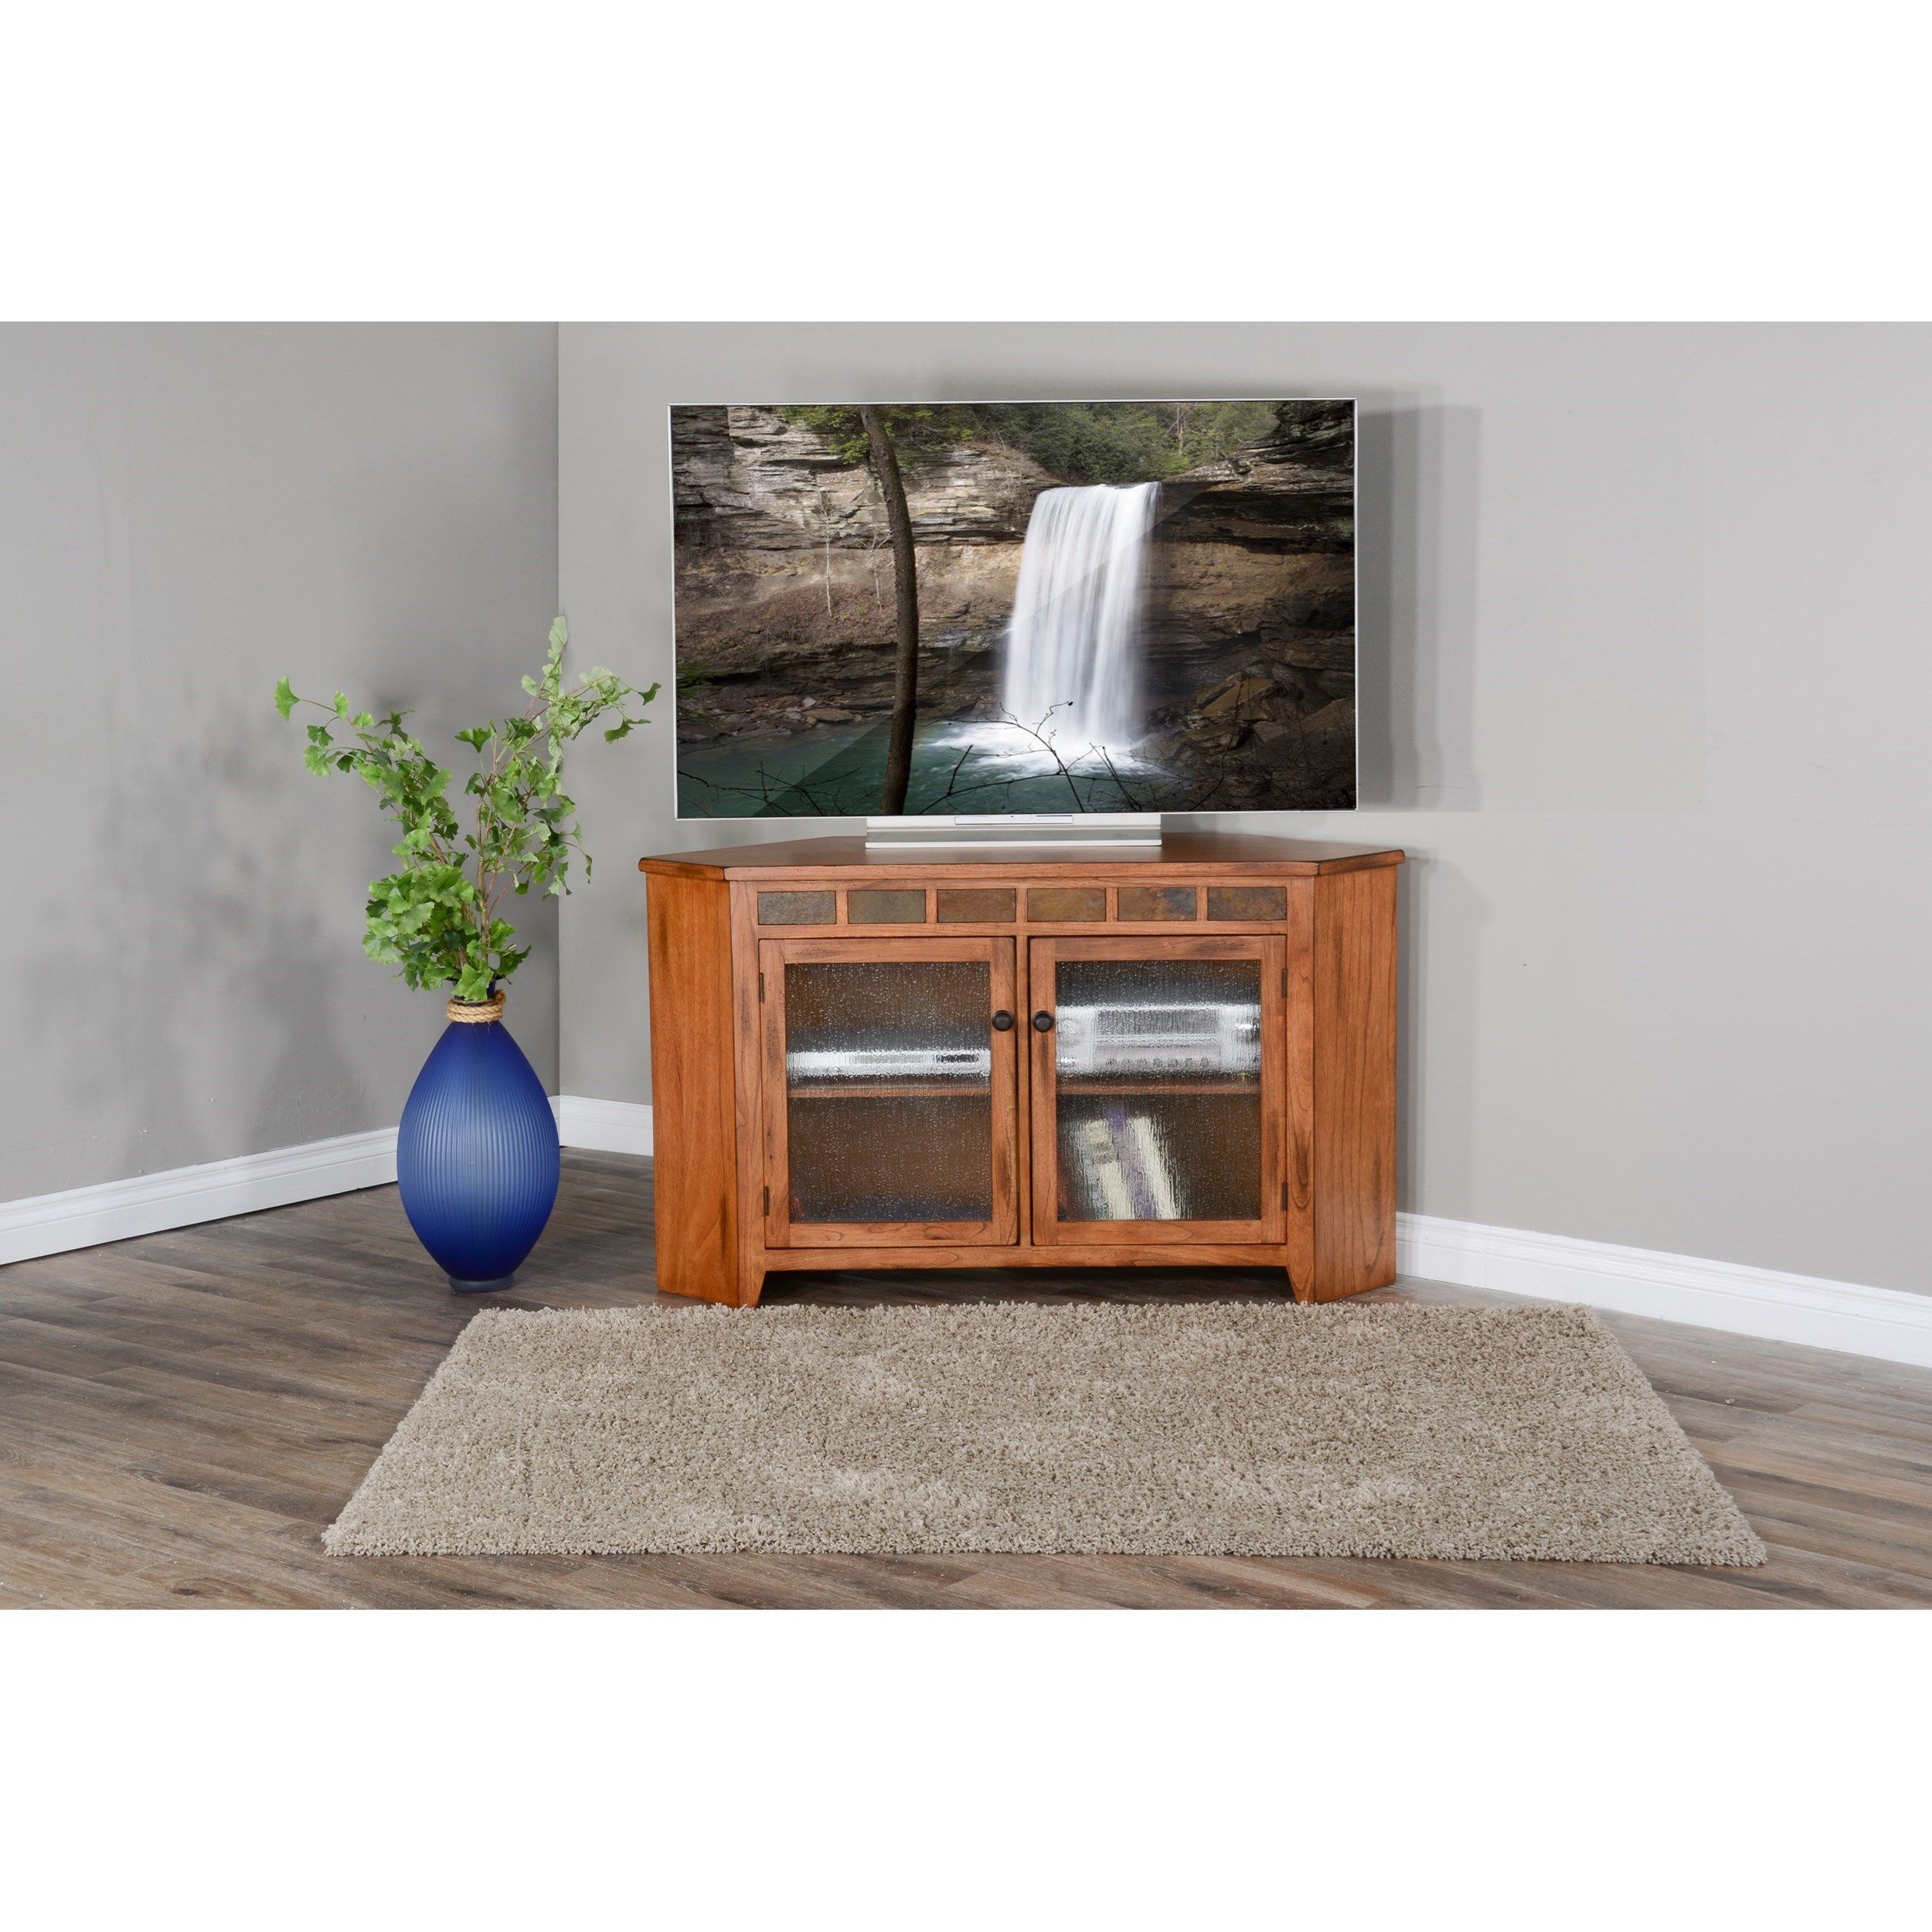 Sunny Designs Sedona 2 55" Corner Tv Stand With Glass With Regard To Modern 2 Glass Door Corner Tv Stands (View 10 of 15)